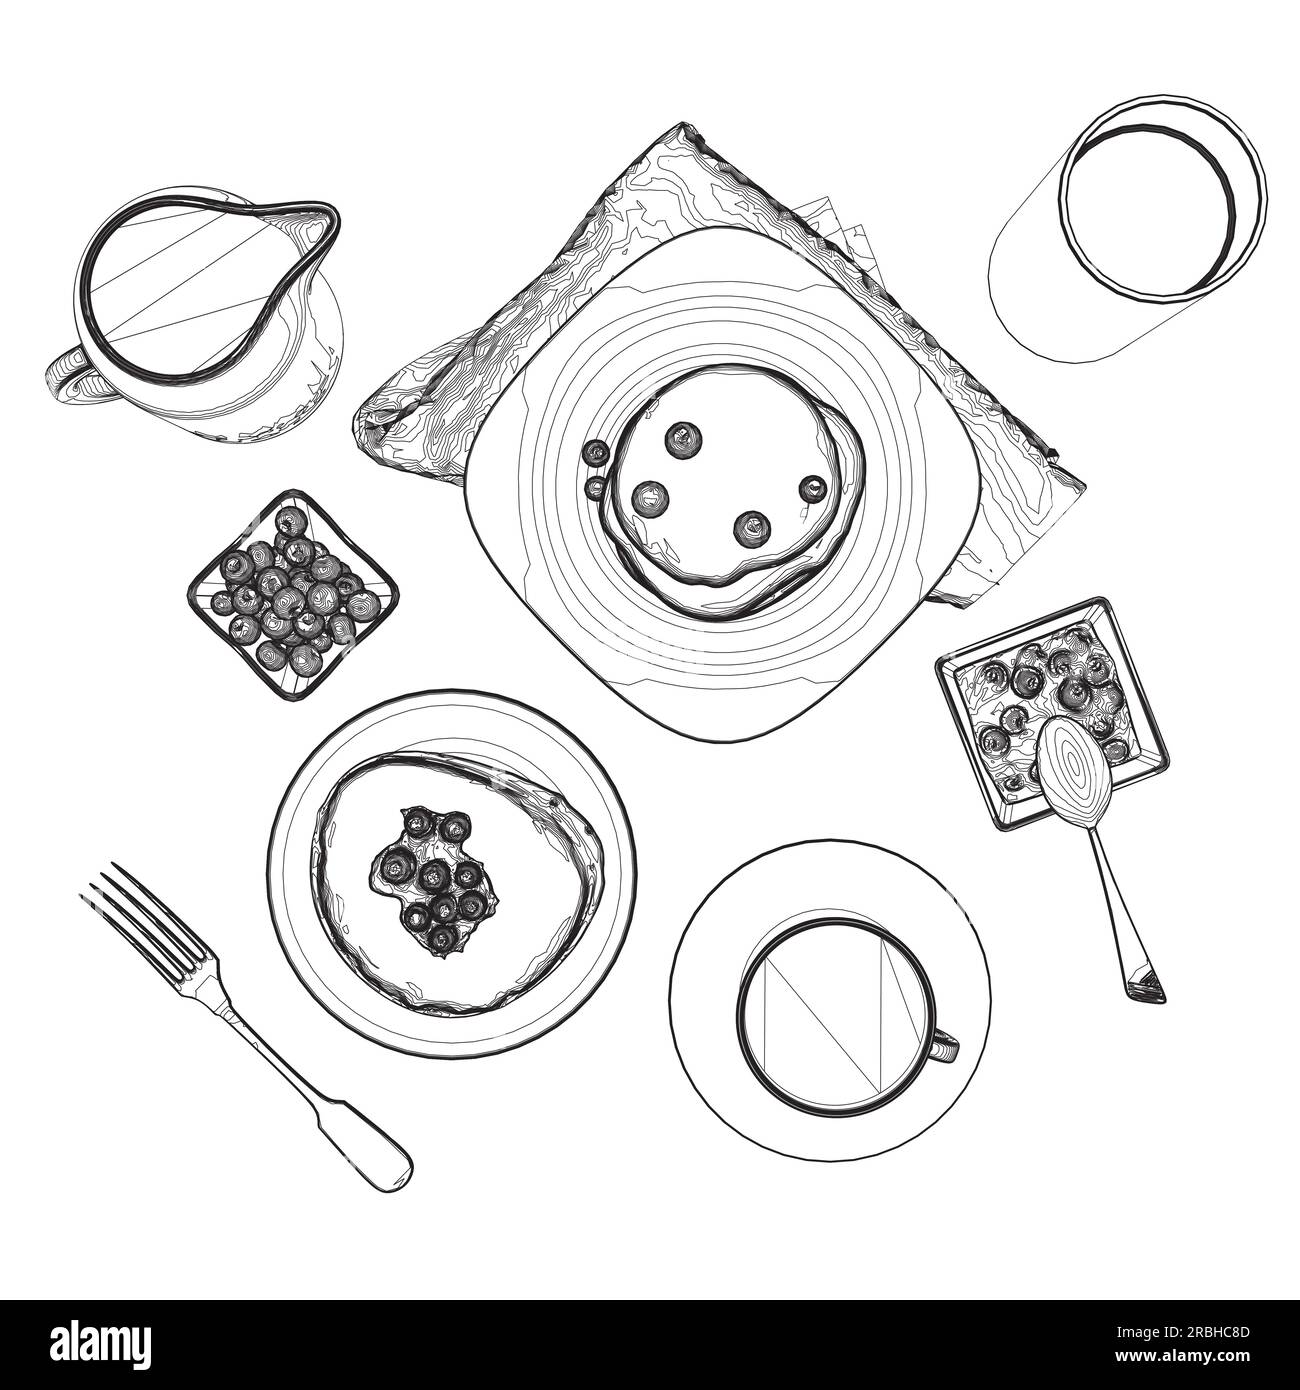 Various healthy morning food and breakfast meals hand drawn with contour lines on white background - berry, toasts, waffles. Vector illustration. Simp Stock Vector